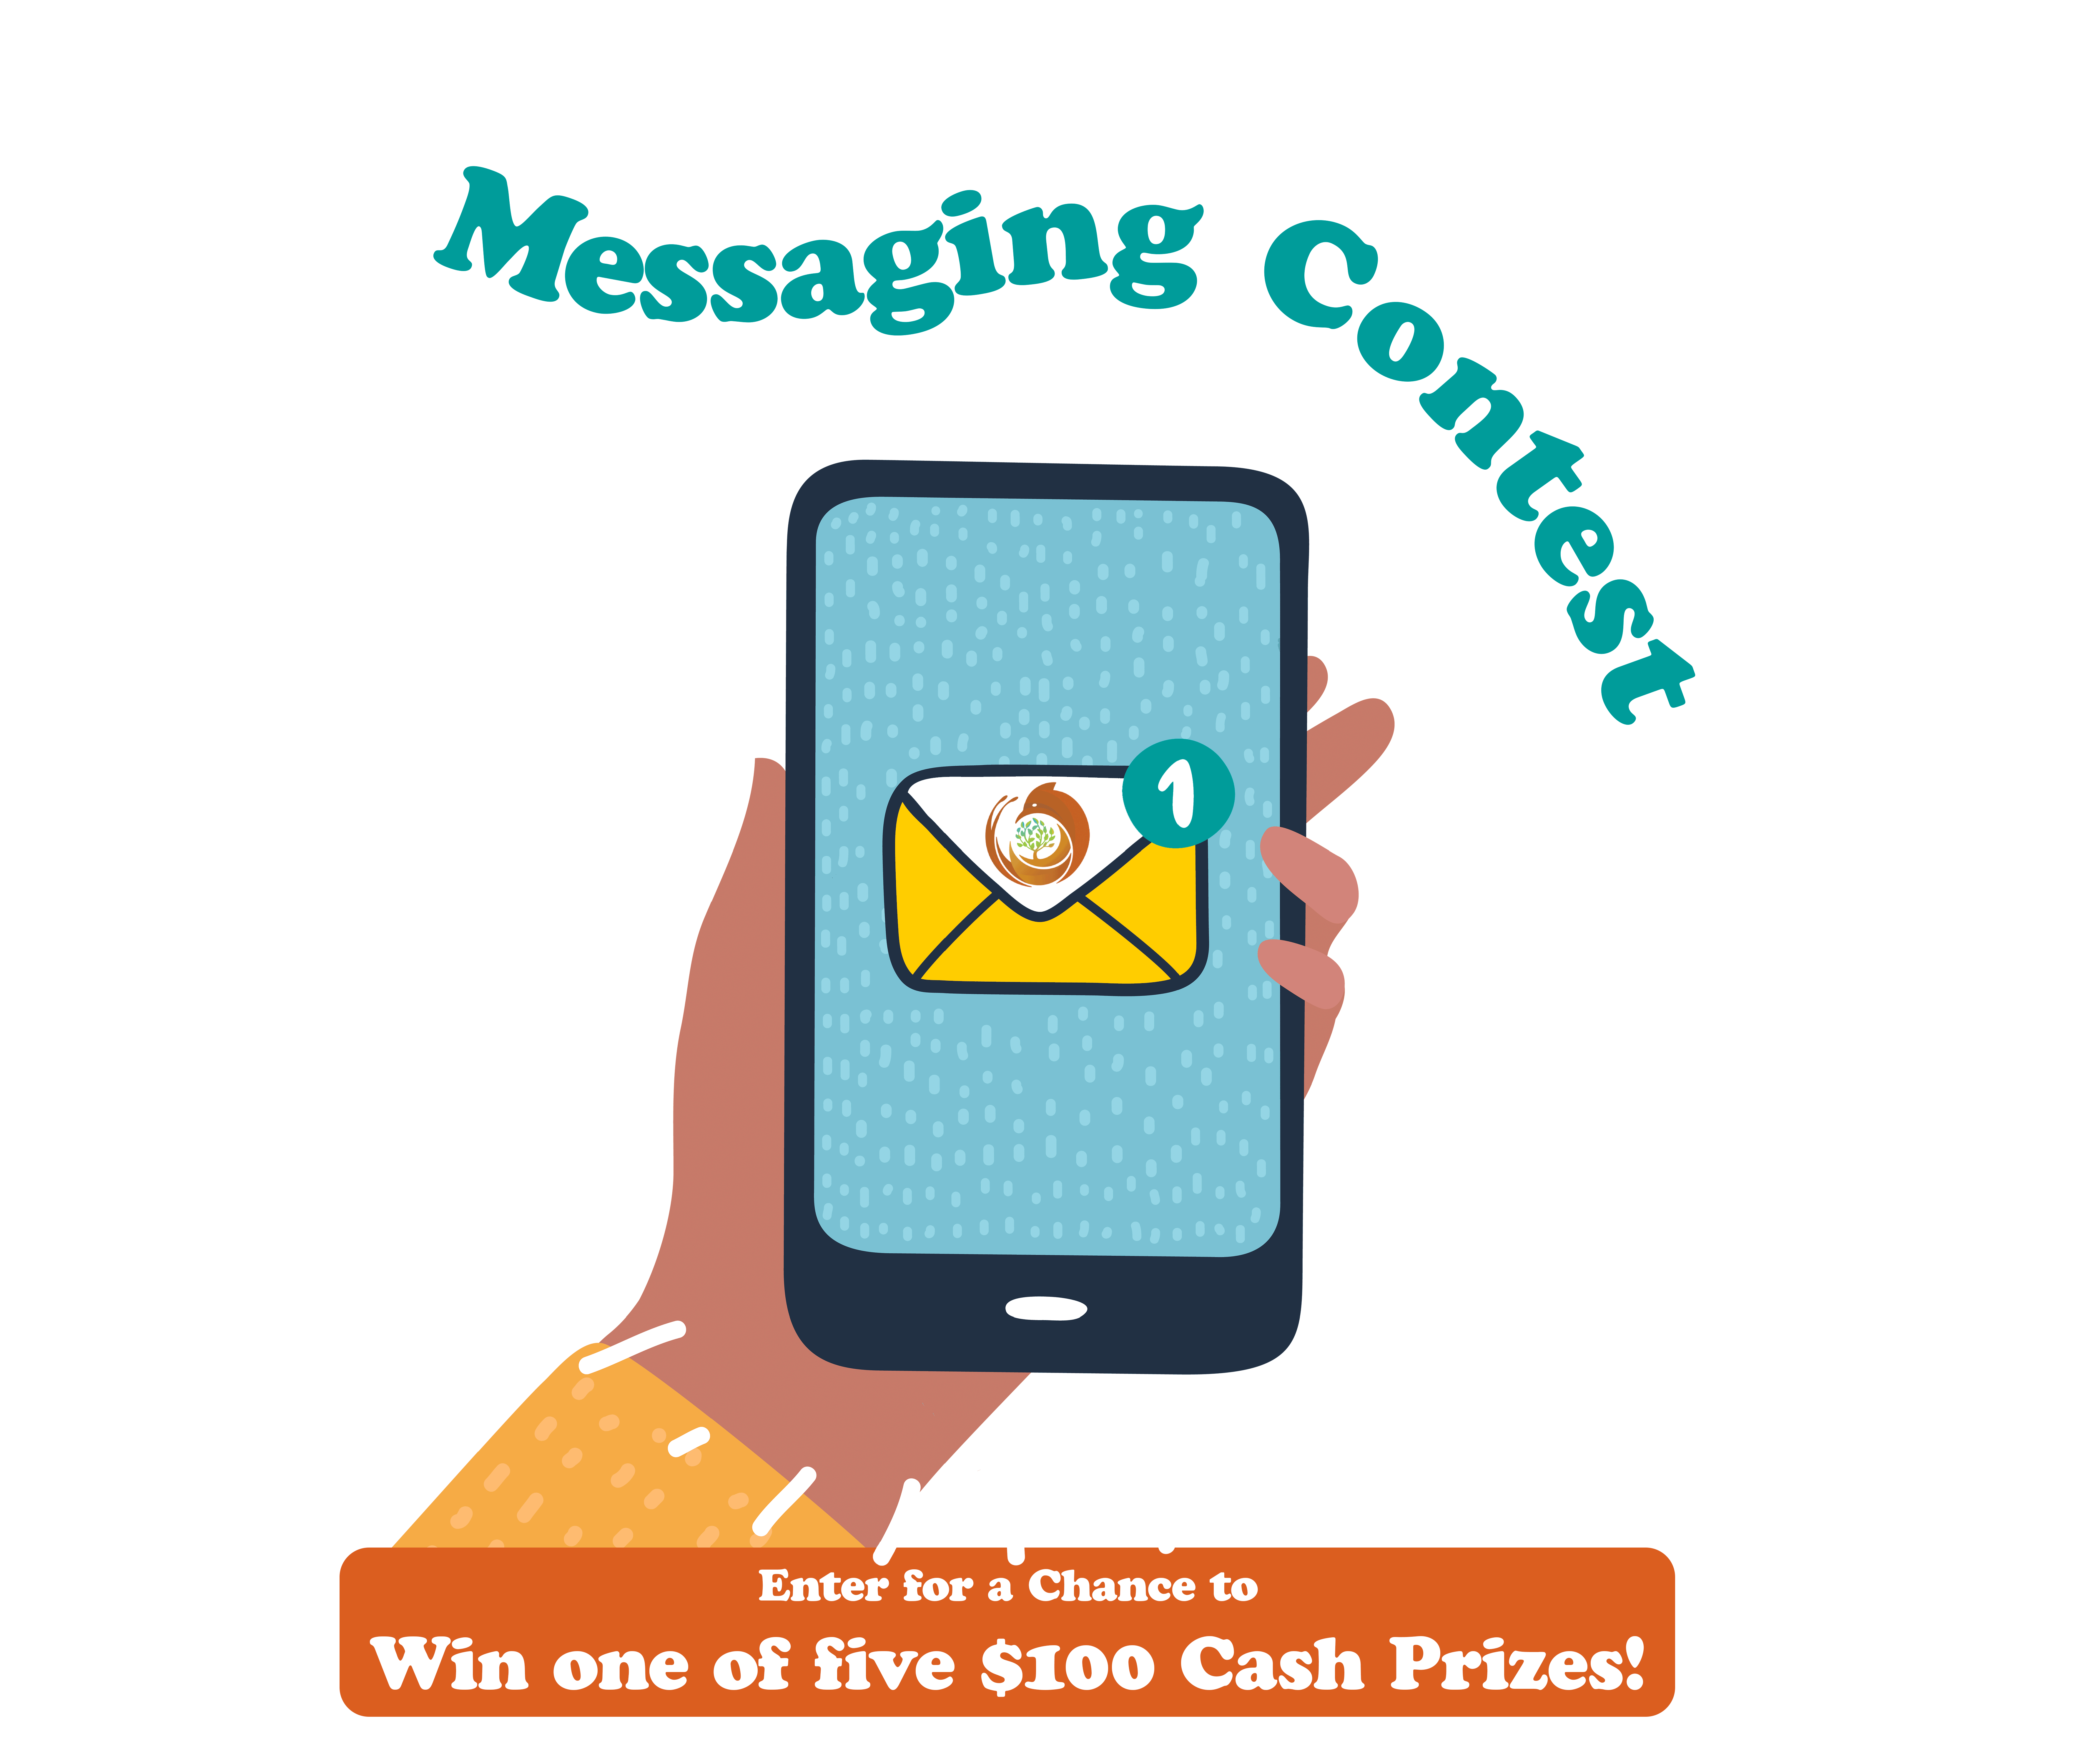 Messaging Contest Promo Image